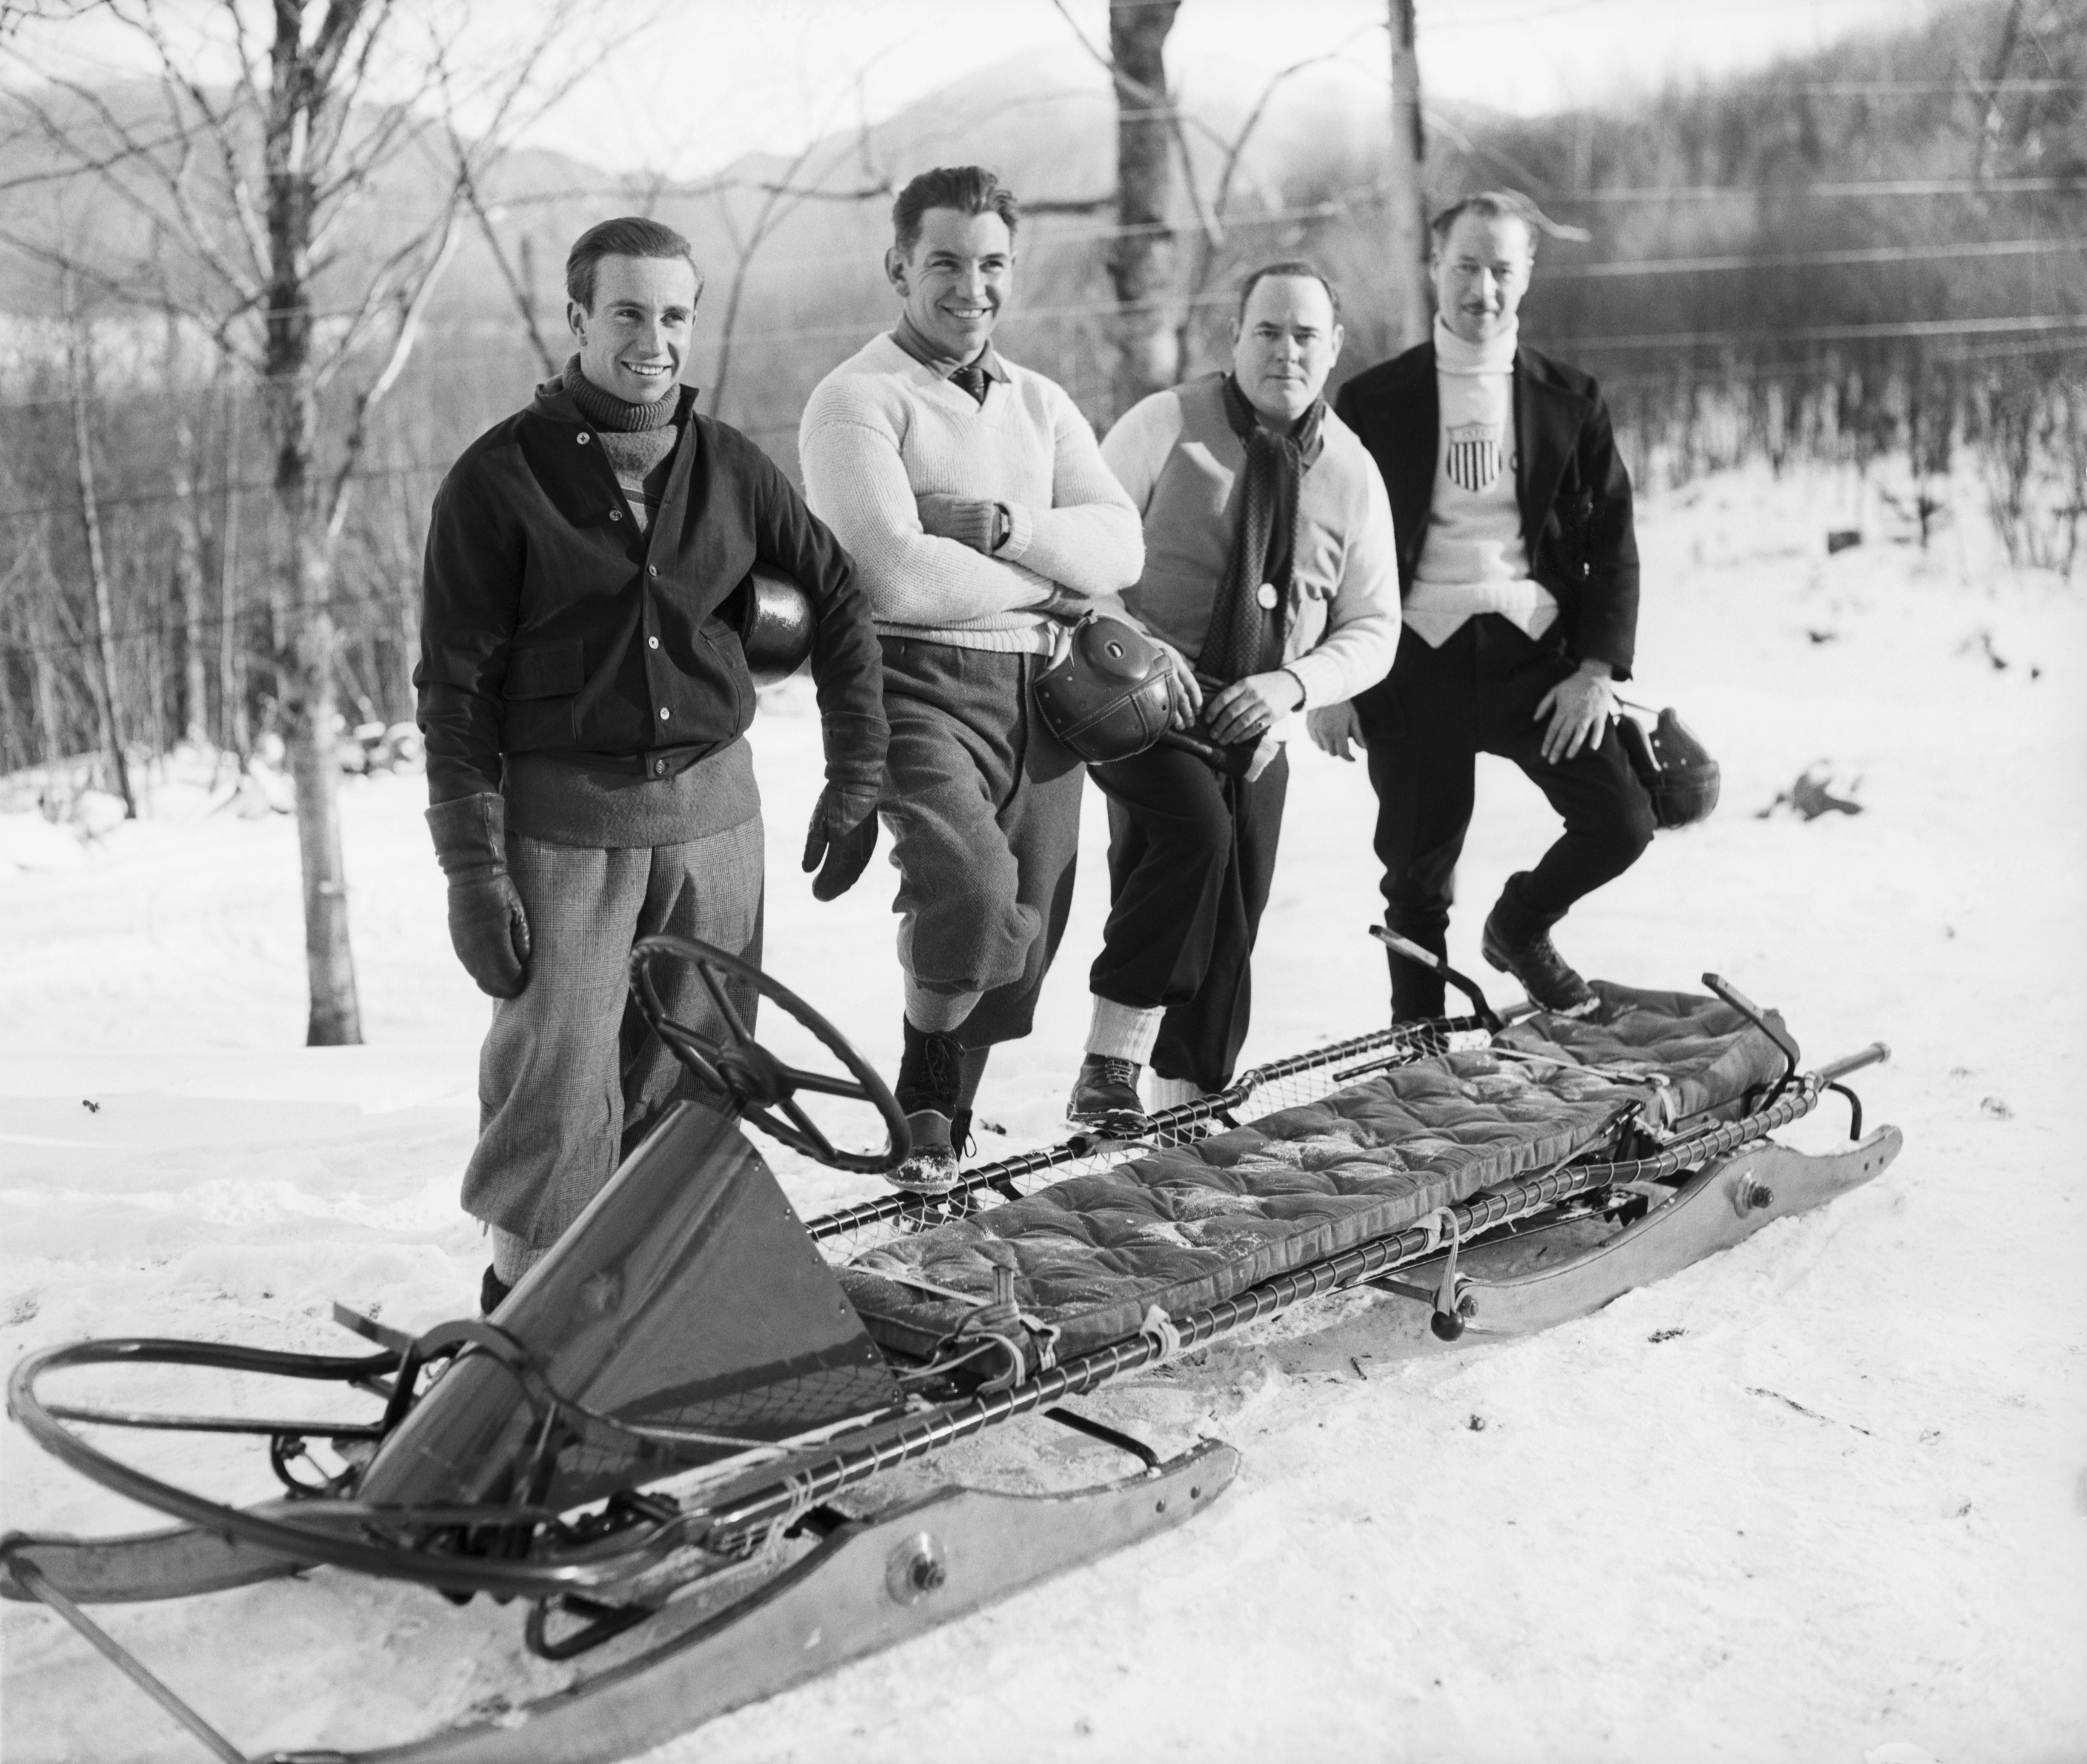 Fiske, Eddie Eagan, Clifford Gray and Jay O'Brien, who will compete in the 1932 Winter Olympics, also members of the 1928 Champion Team. Bettmann—Bettmann Archive (Bettmann—Bettmann Archive)